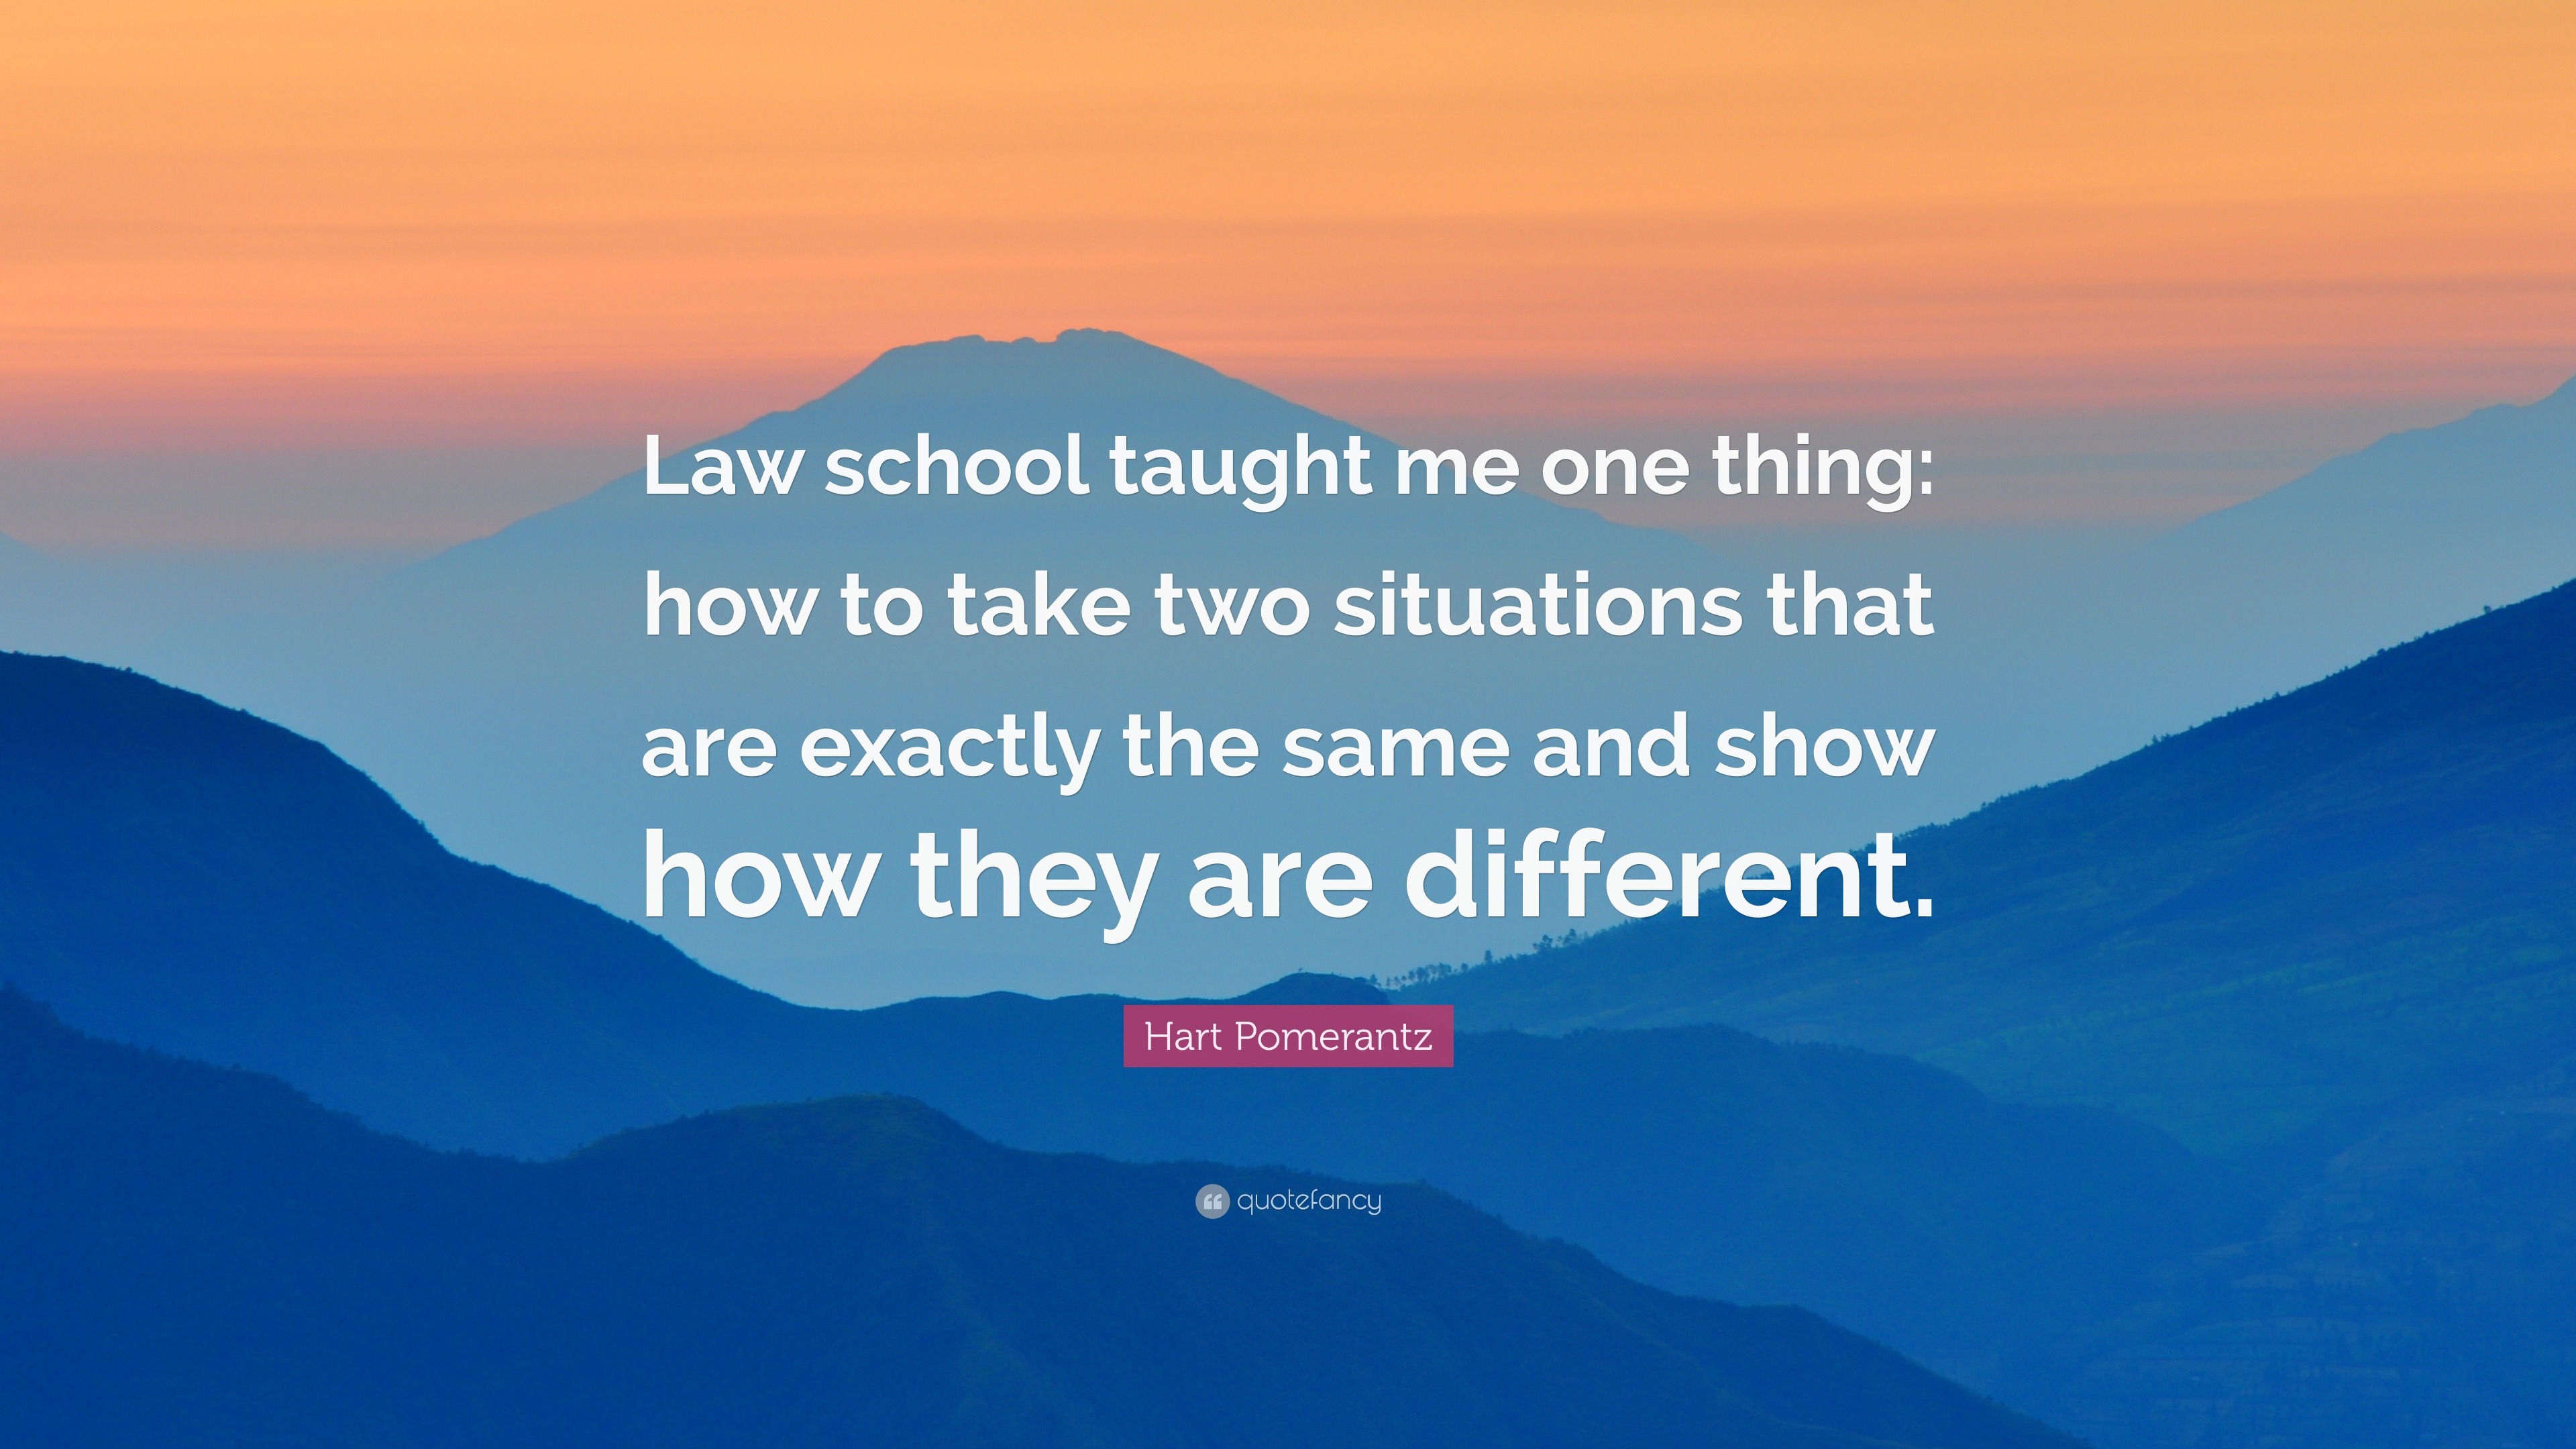 Hart Pomerantz Quote “law School Taught Me One Thing How To Take Two Situations That Are 